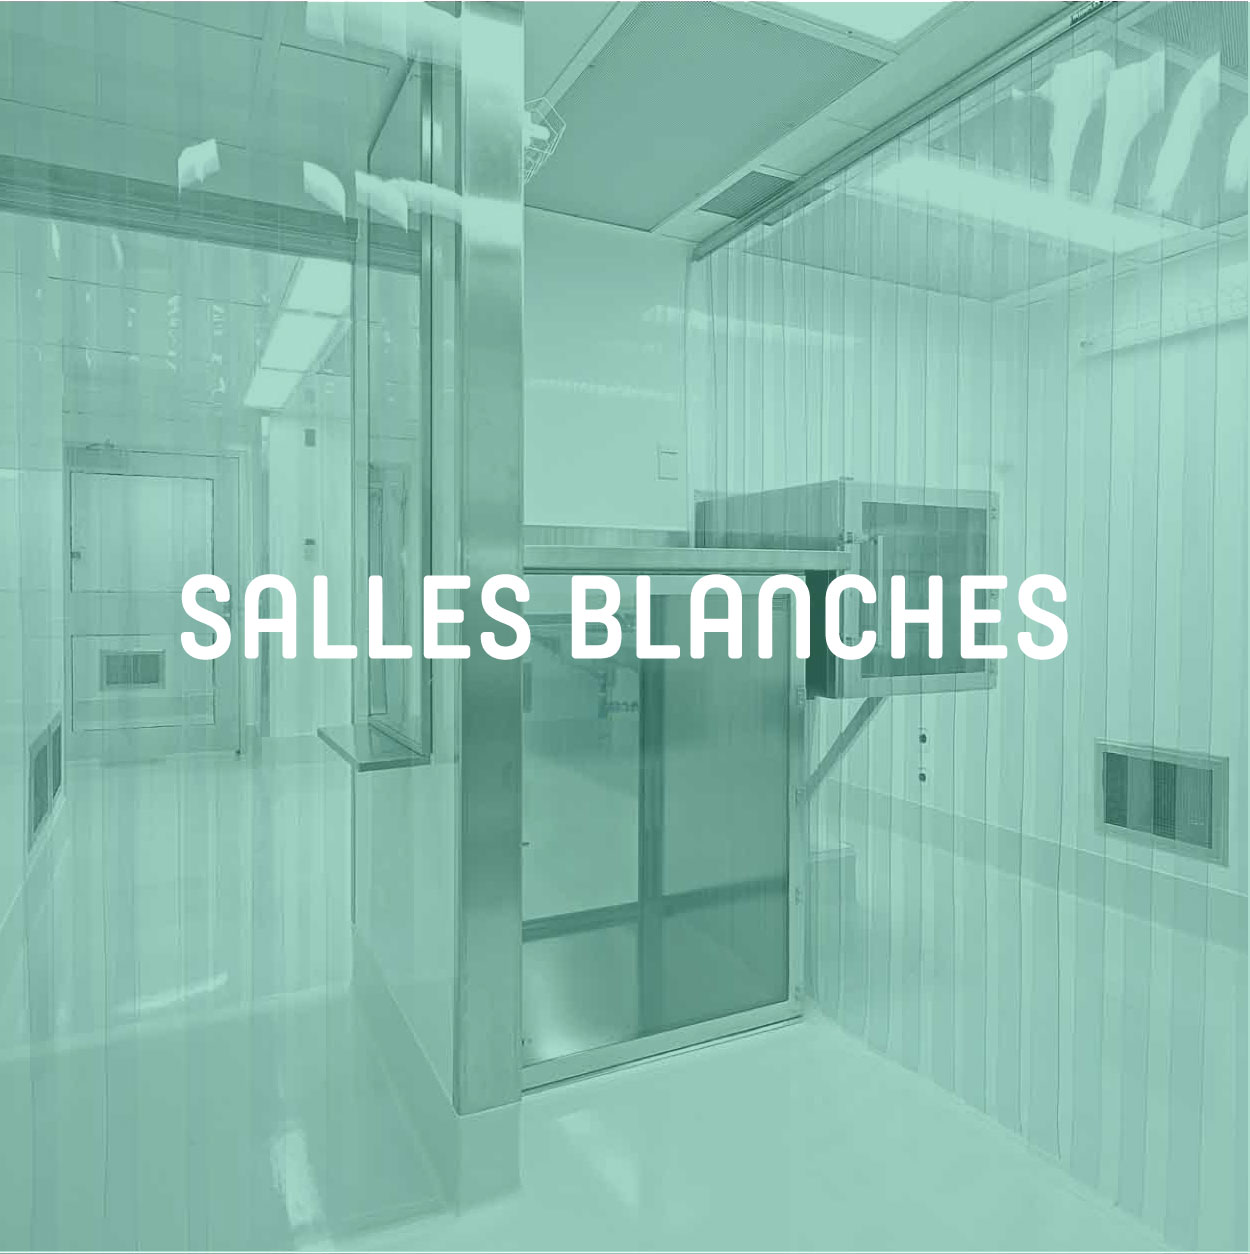 Salles blanches